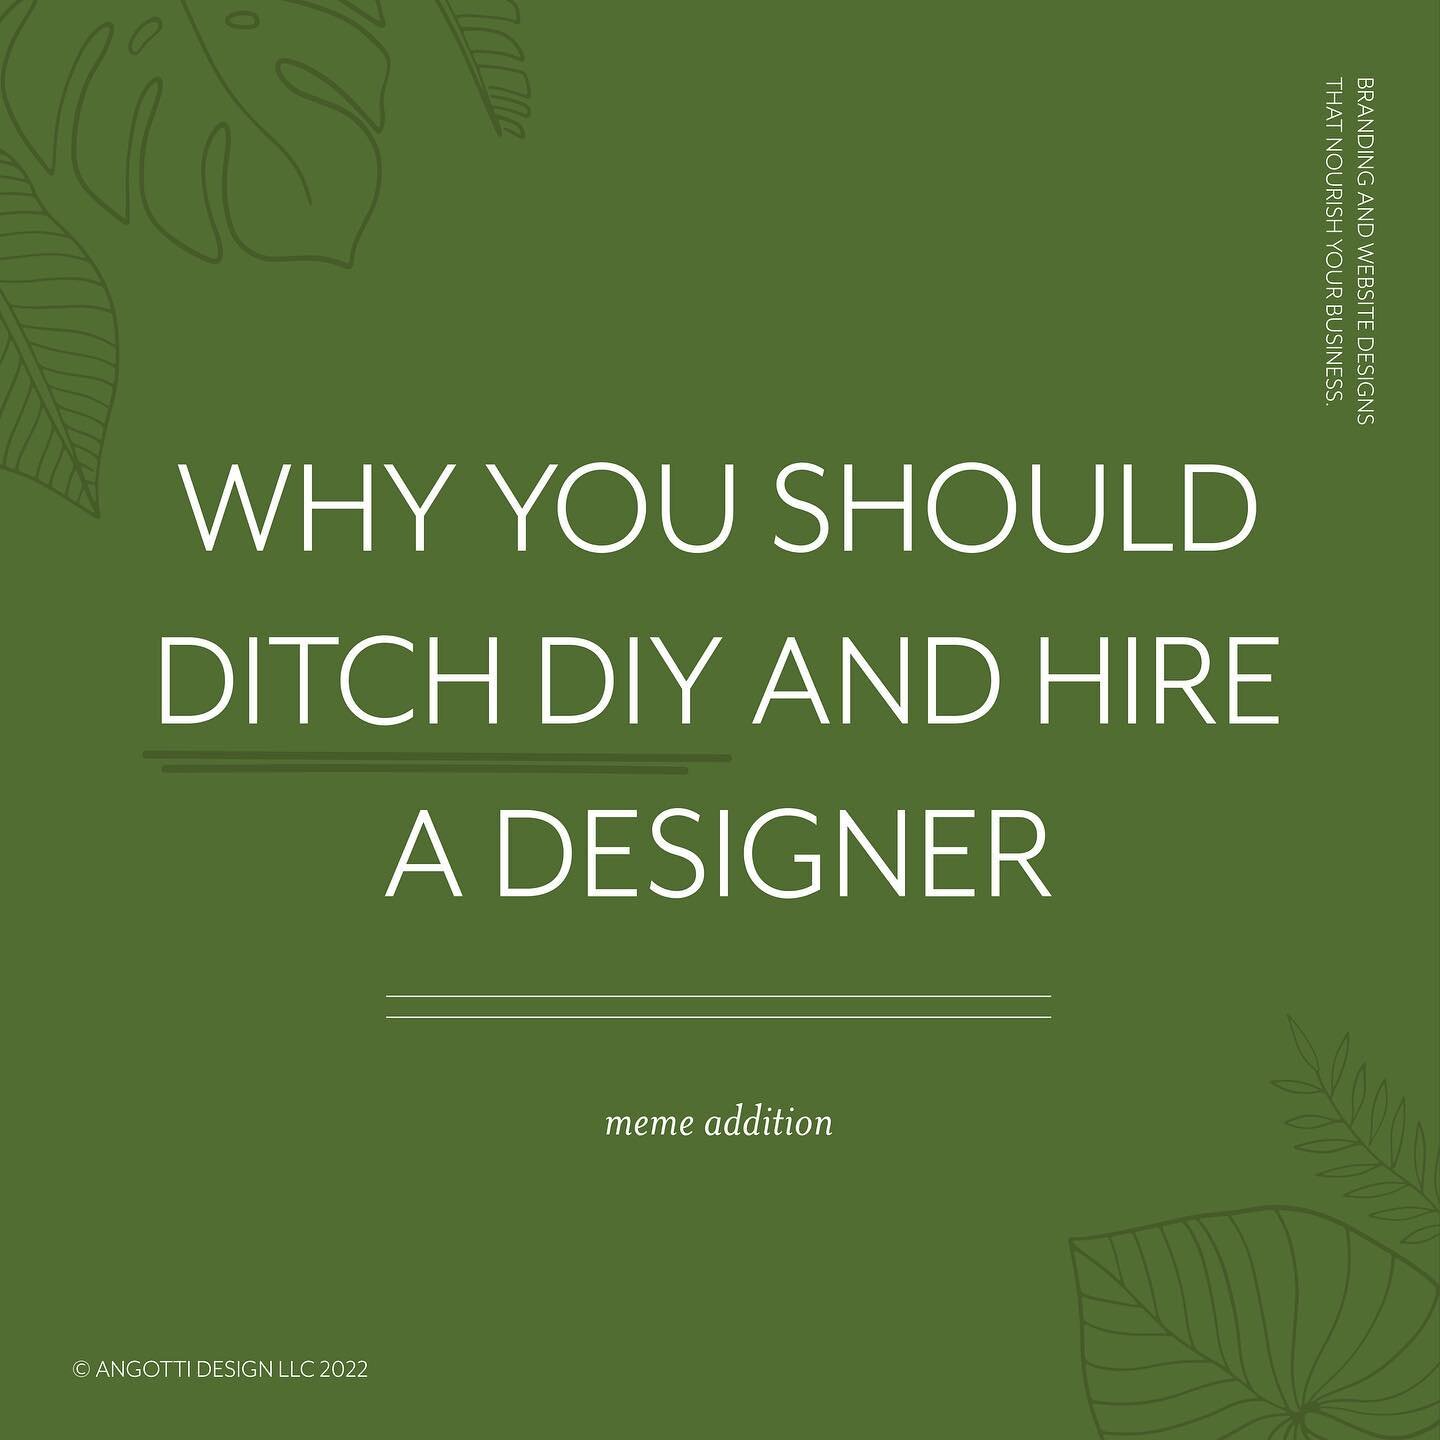 Why you should DITCH DIY and hire a designer.

We all know running a business is stressful and expensive, so we all think &ldquo;why not try to do as much by myself as possible?&rdquo;

Well in some aspects that&rsquo;s a great idea, but not when it 